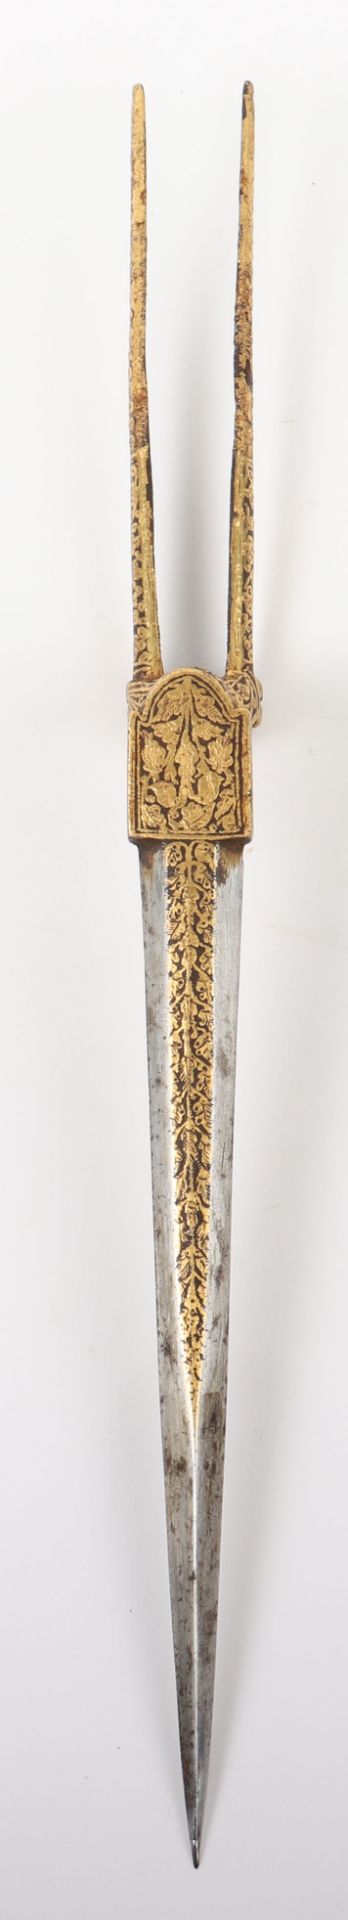 Rare Indian Bayonet Sangin Intended to be Bound to a Matchlock Gun Torador, 18th or 19th Century - Image 2 of 16